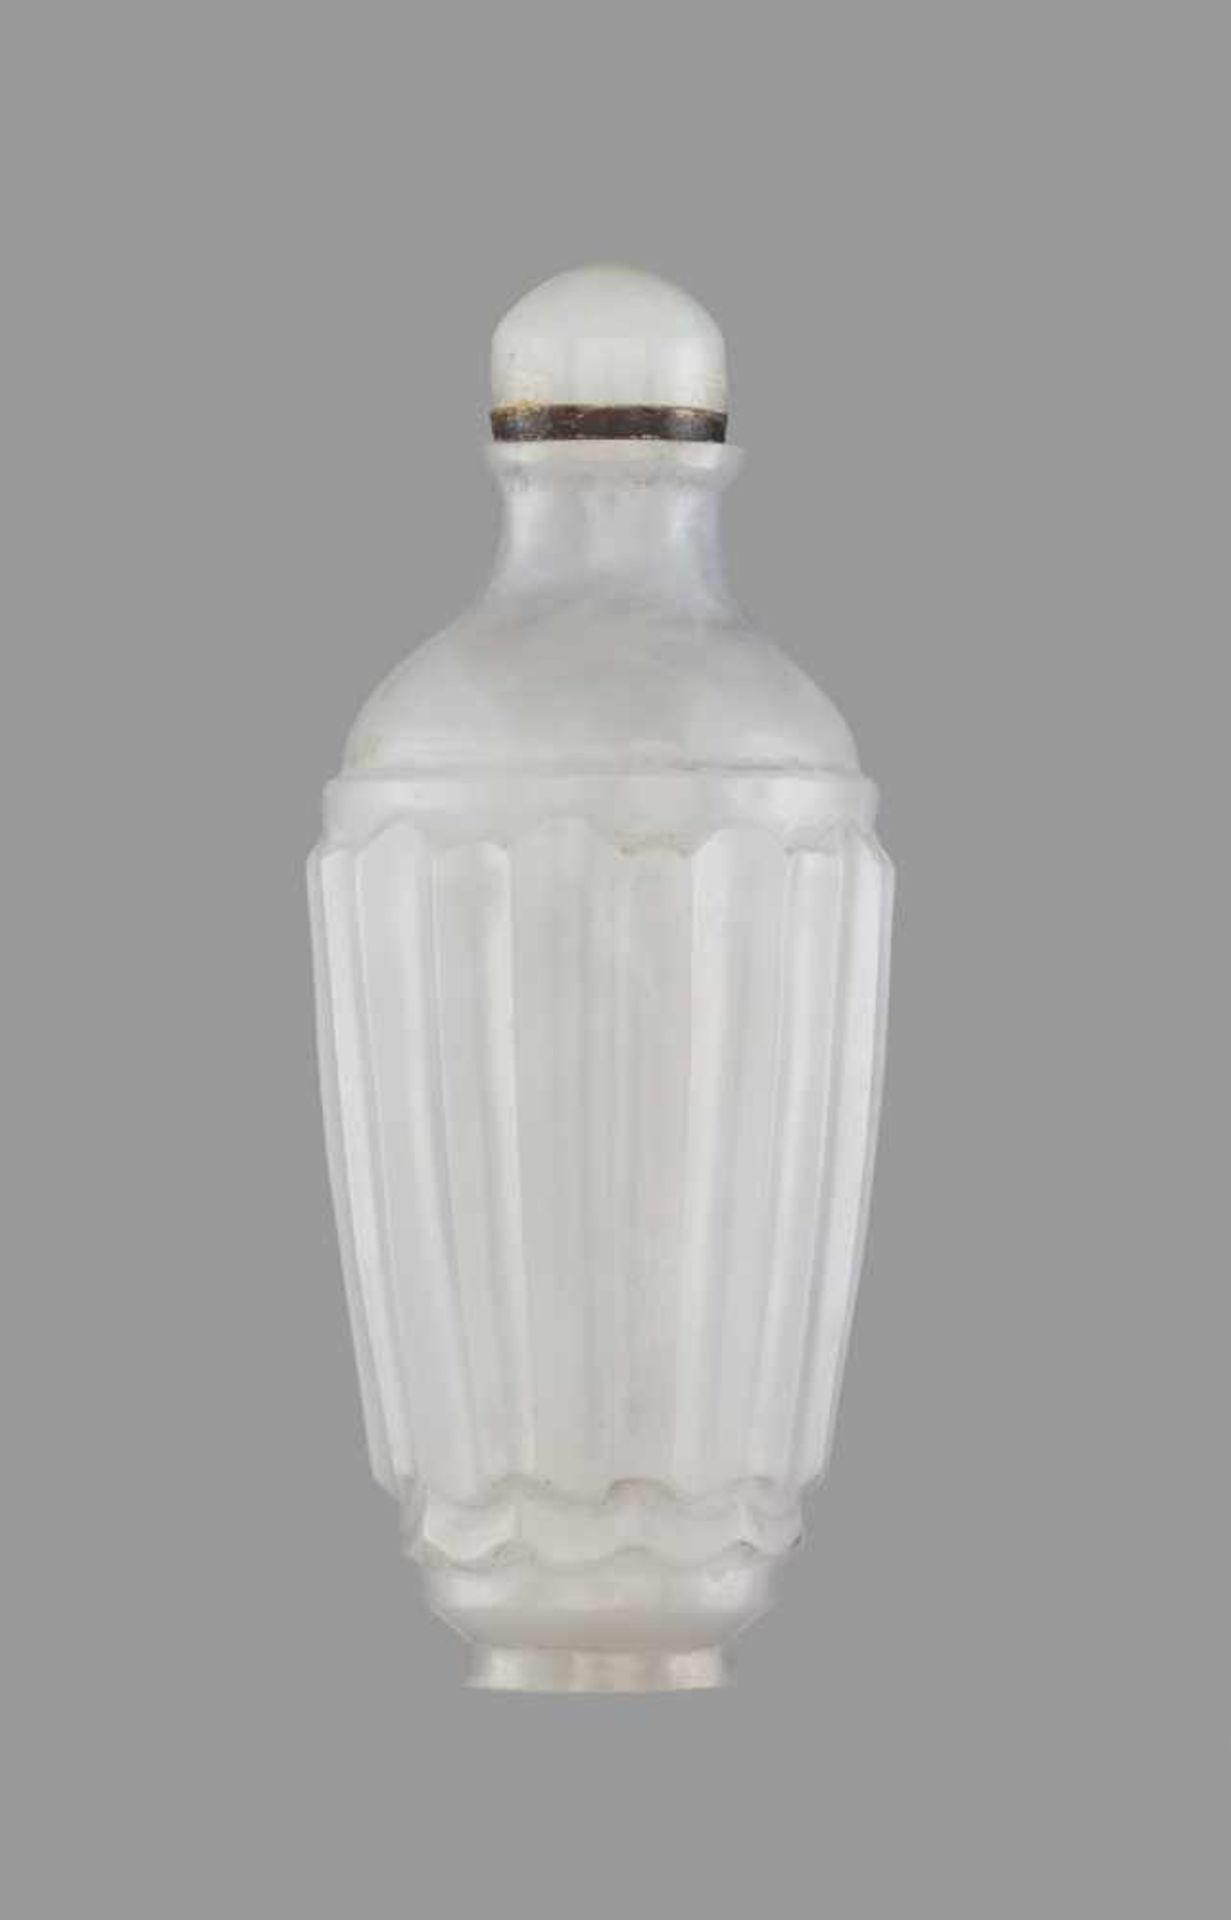 AN INSCRIBED WHITE JADE MUGHAL STYLE SNUFF BOTTLE White nephrite with greyish streaks, good even